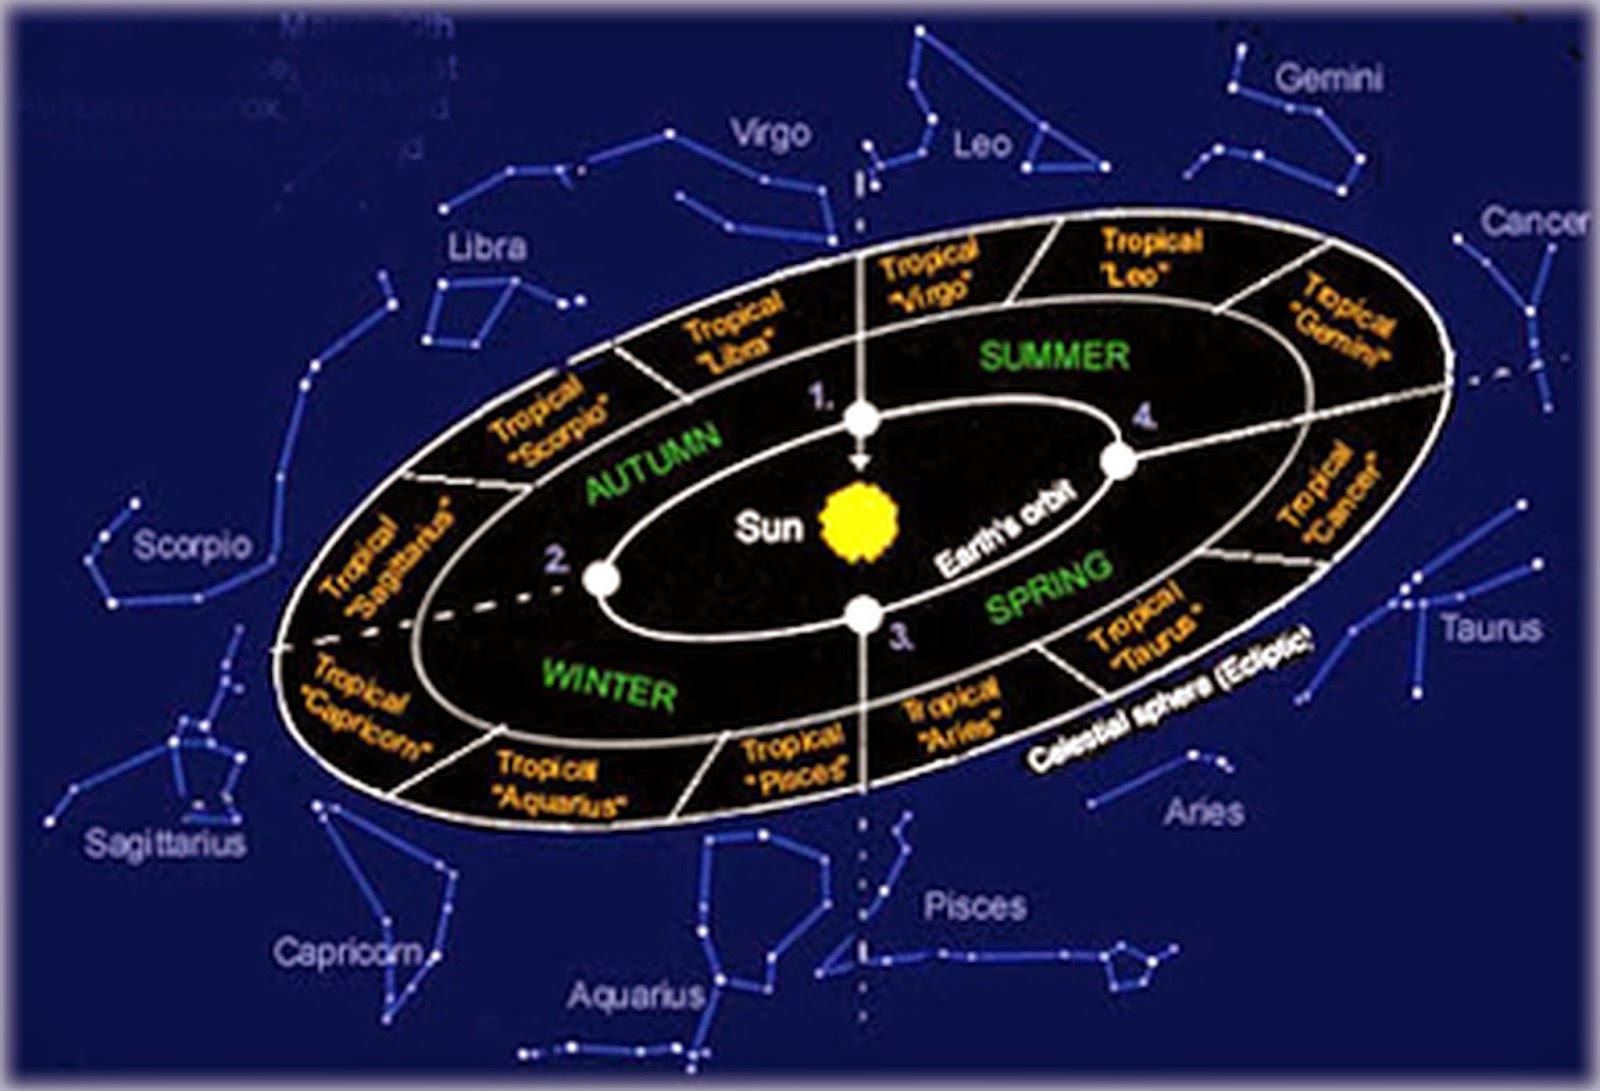 Know Your Hindu Religion: Tamil Astrology